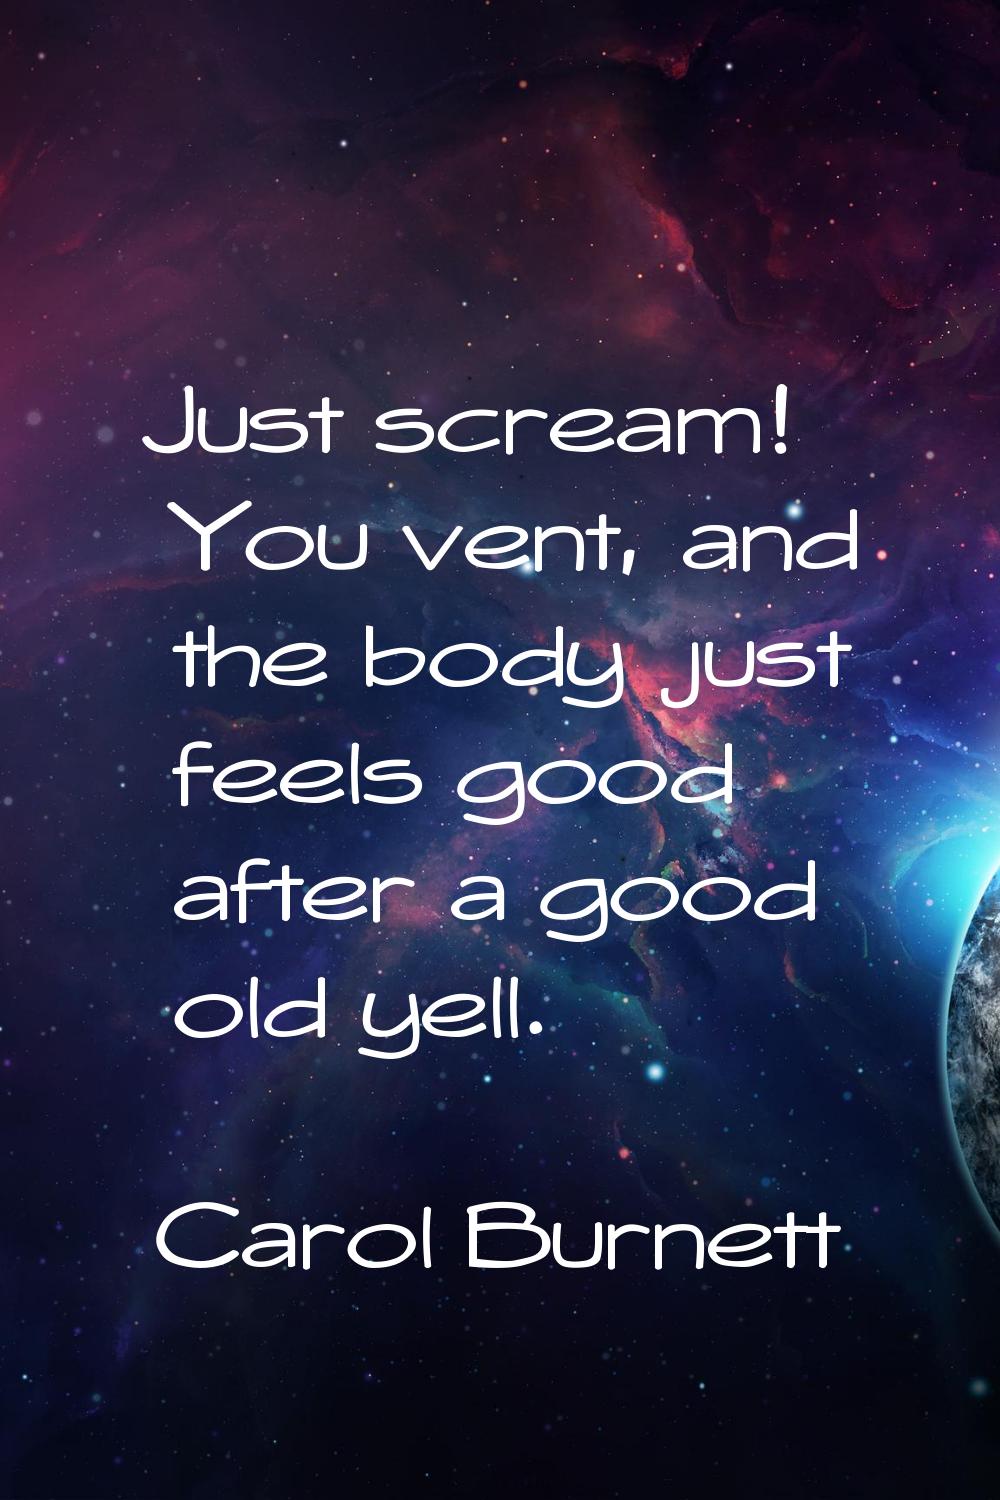 Just scream! You vent, and the body just feels good after a good old yell.